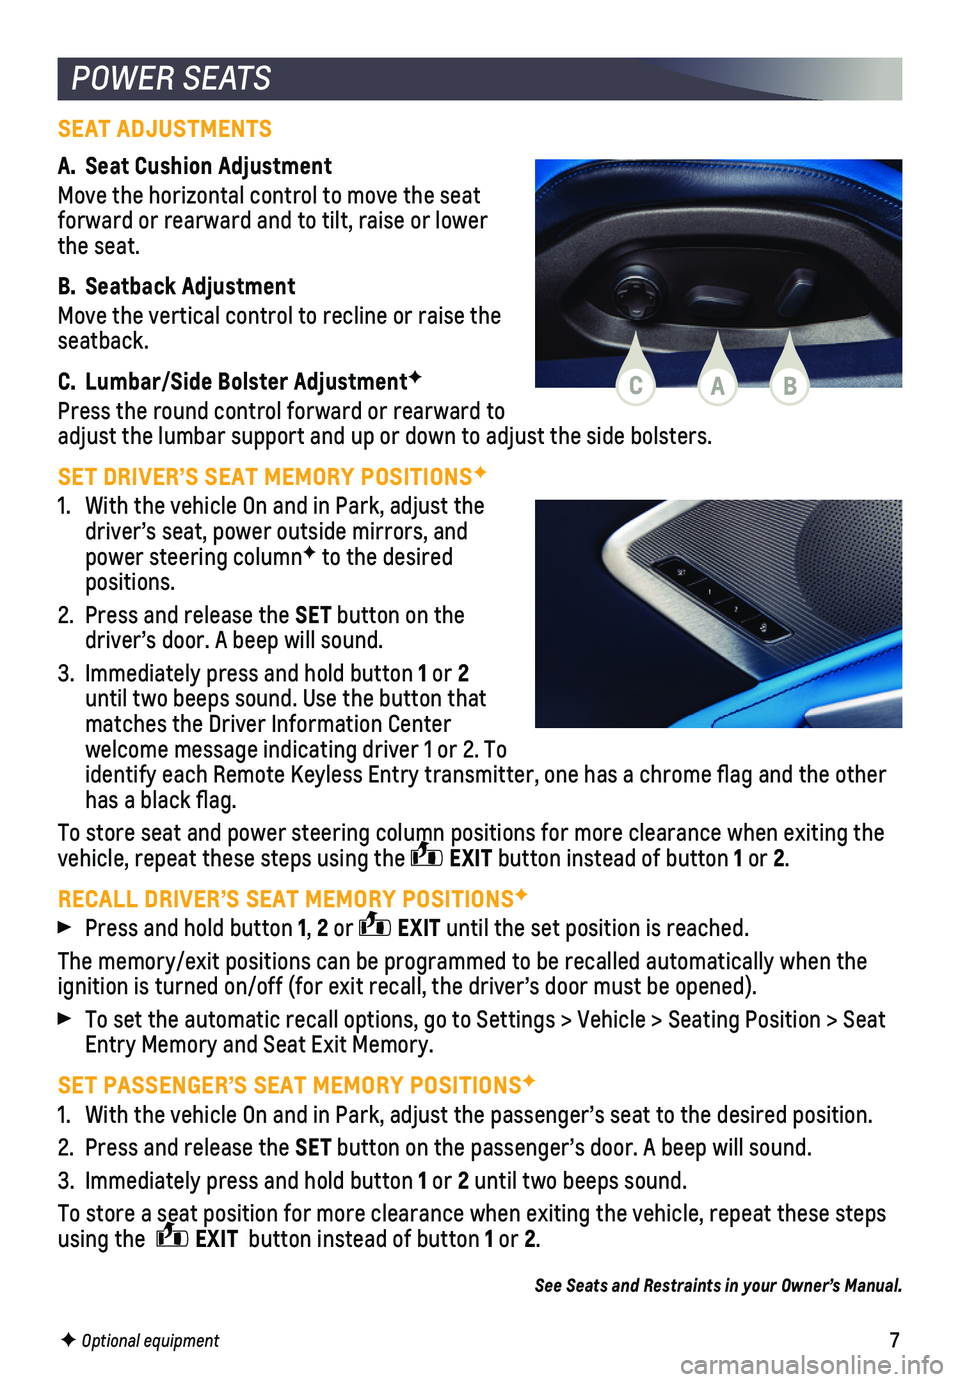 CHEVROLET CORVETTE 2020  Get To Know Guide 7F Optional equipment
SEAT ADJUSTMENTS
A. Seat Cushion Adjustment
Move the horizontal control to move the seat forward or rearward and to tilt, raise or lower the seat.
B. Seatback Adjustment
Move the